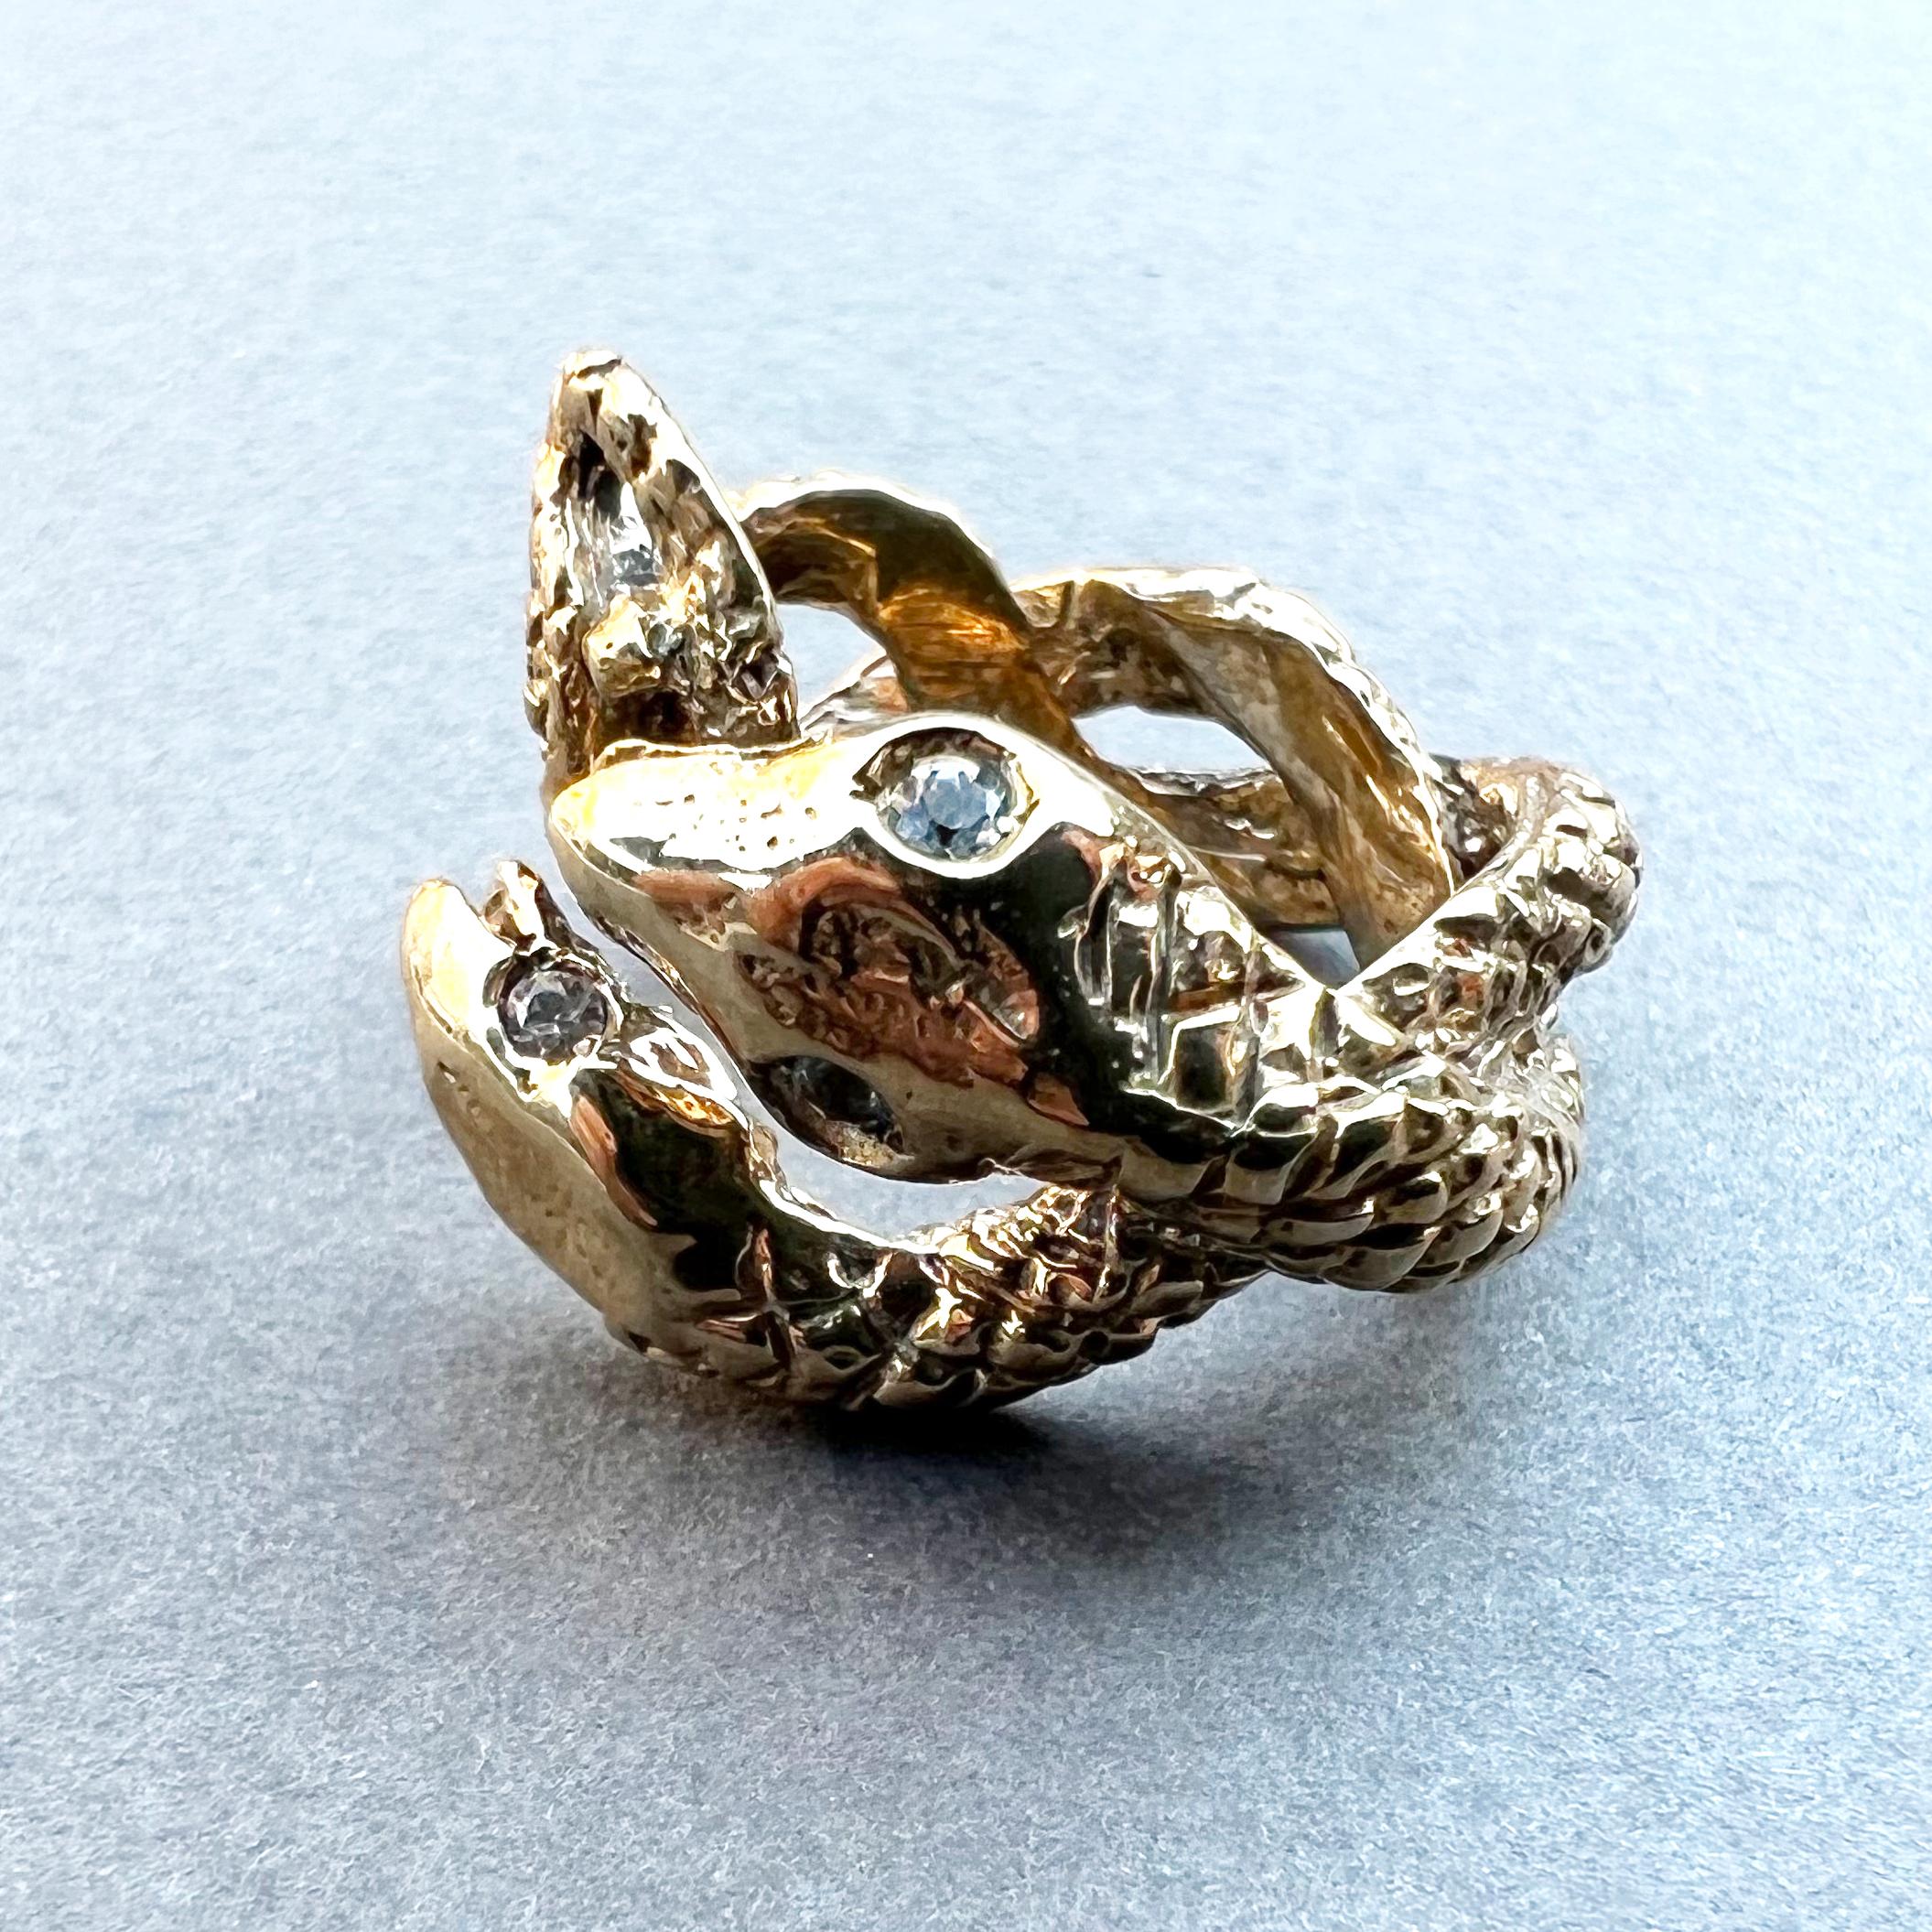 Animal jewelry Snake Ring with 4  Pcs Aquamarine  made in Bronze Cocktail Ring J Dauphin

This ring is adjustable - fits size 6-8

J DAUPHIN 